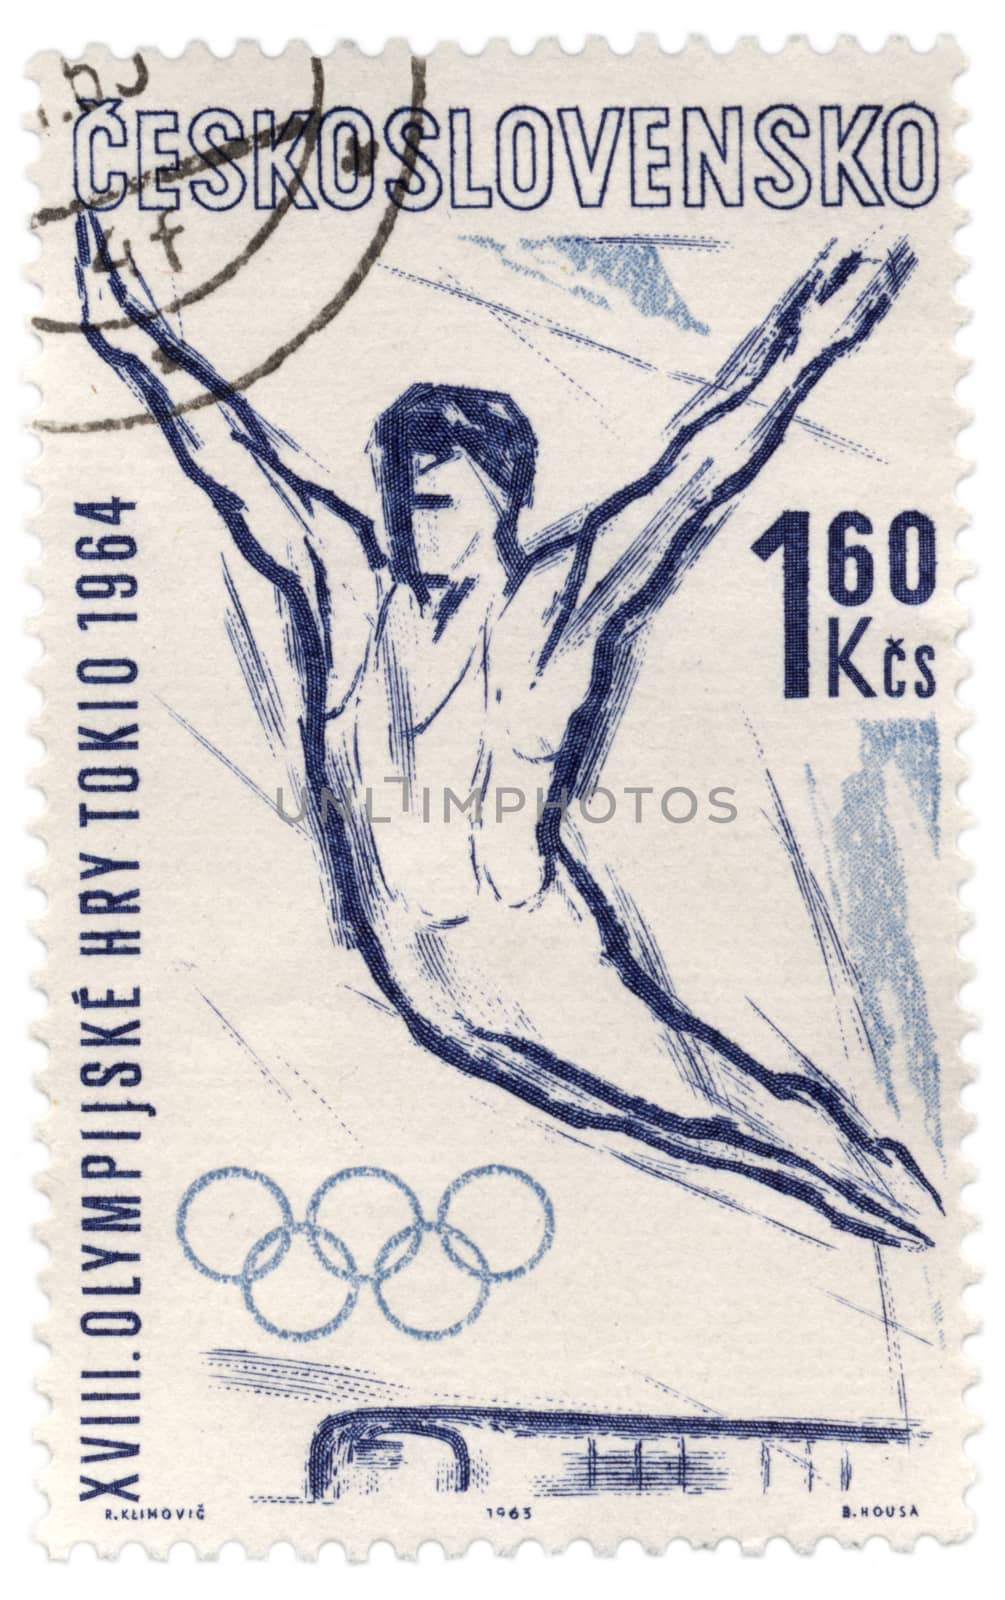 CZECHOSLOVAKIA - CIRCA 1963: A stamp printed in Czechoslovakia, shows flying gymnast, devoted to Olympics in Tokyo, series, circa 1963